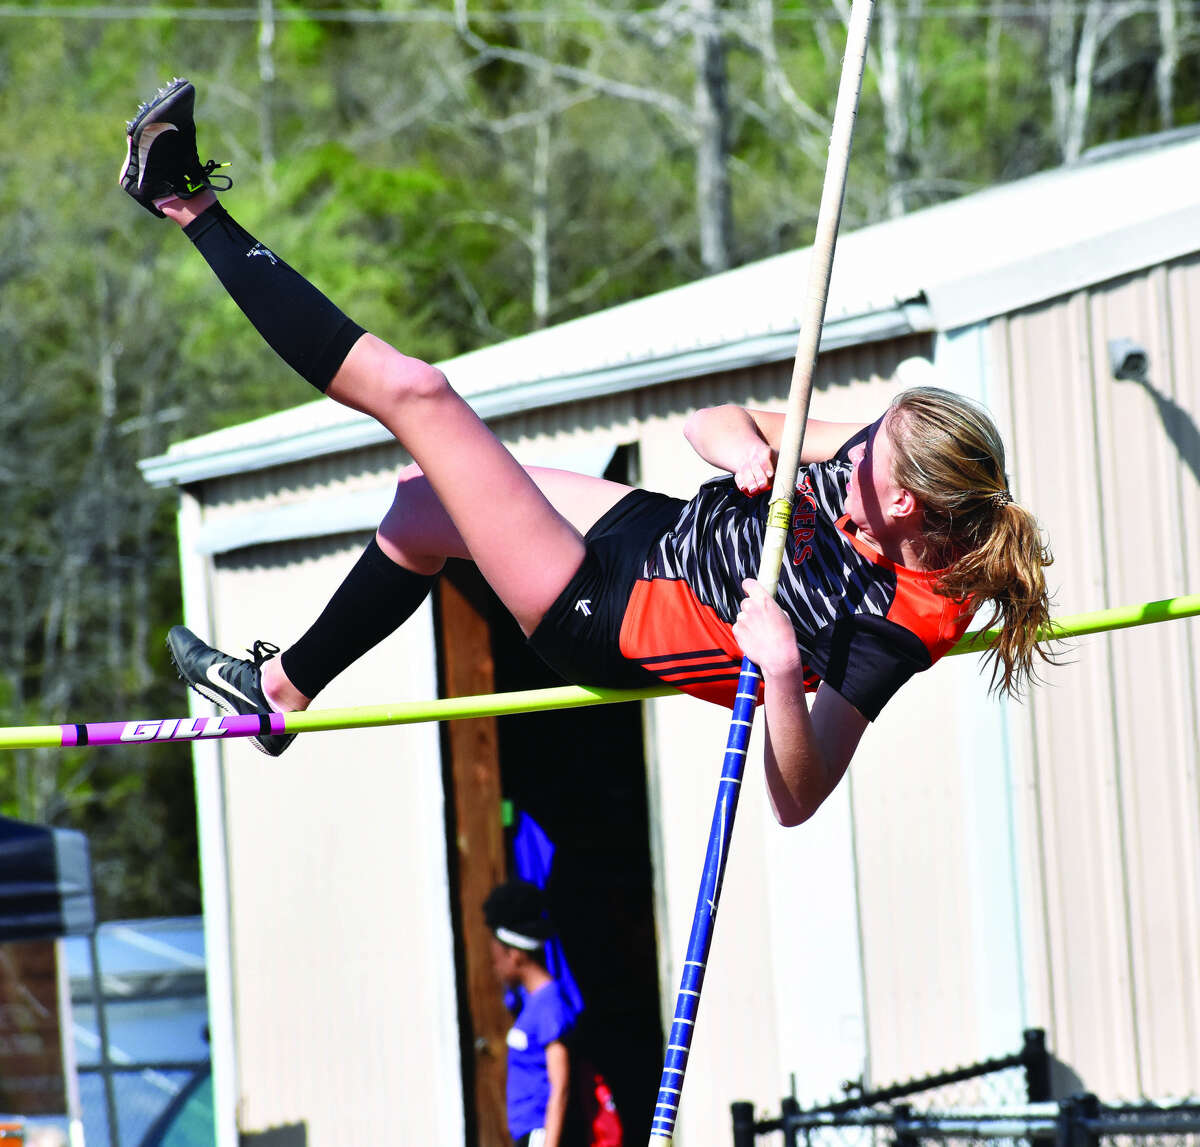 Edwardsville’s Emma Herman competes in the pole vault during the Collinsville Invitational on Friday.